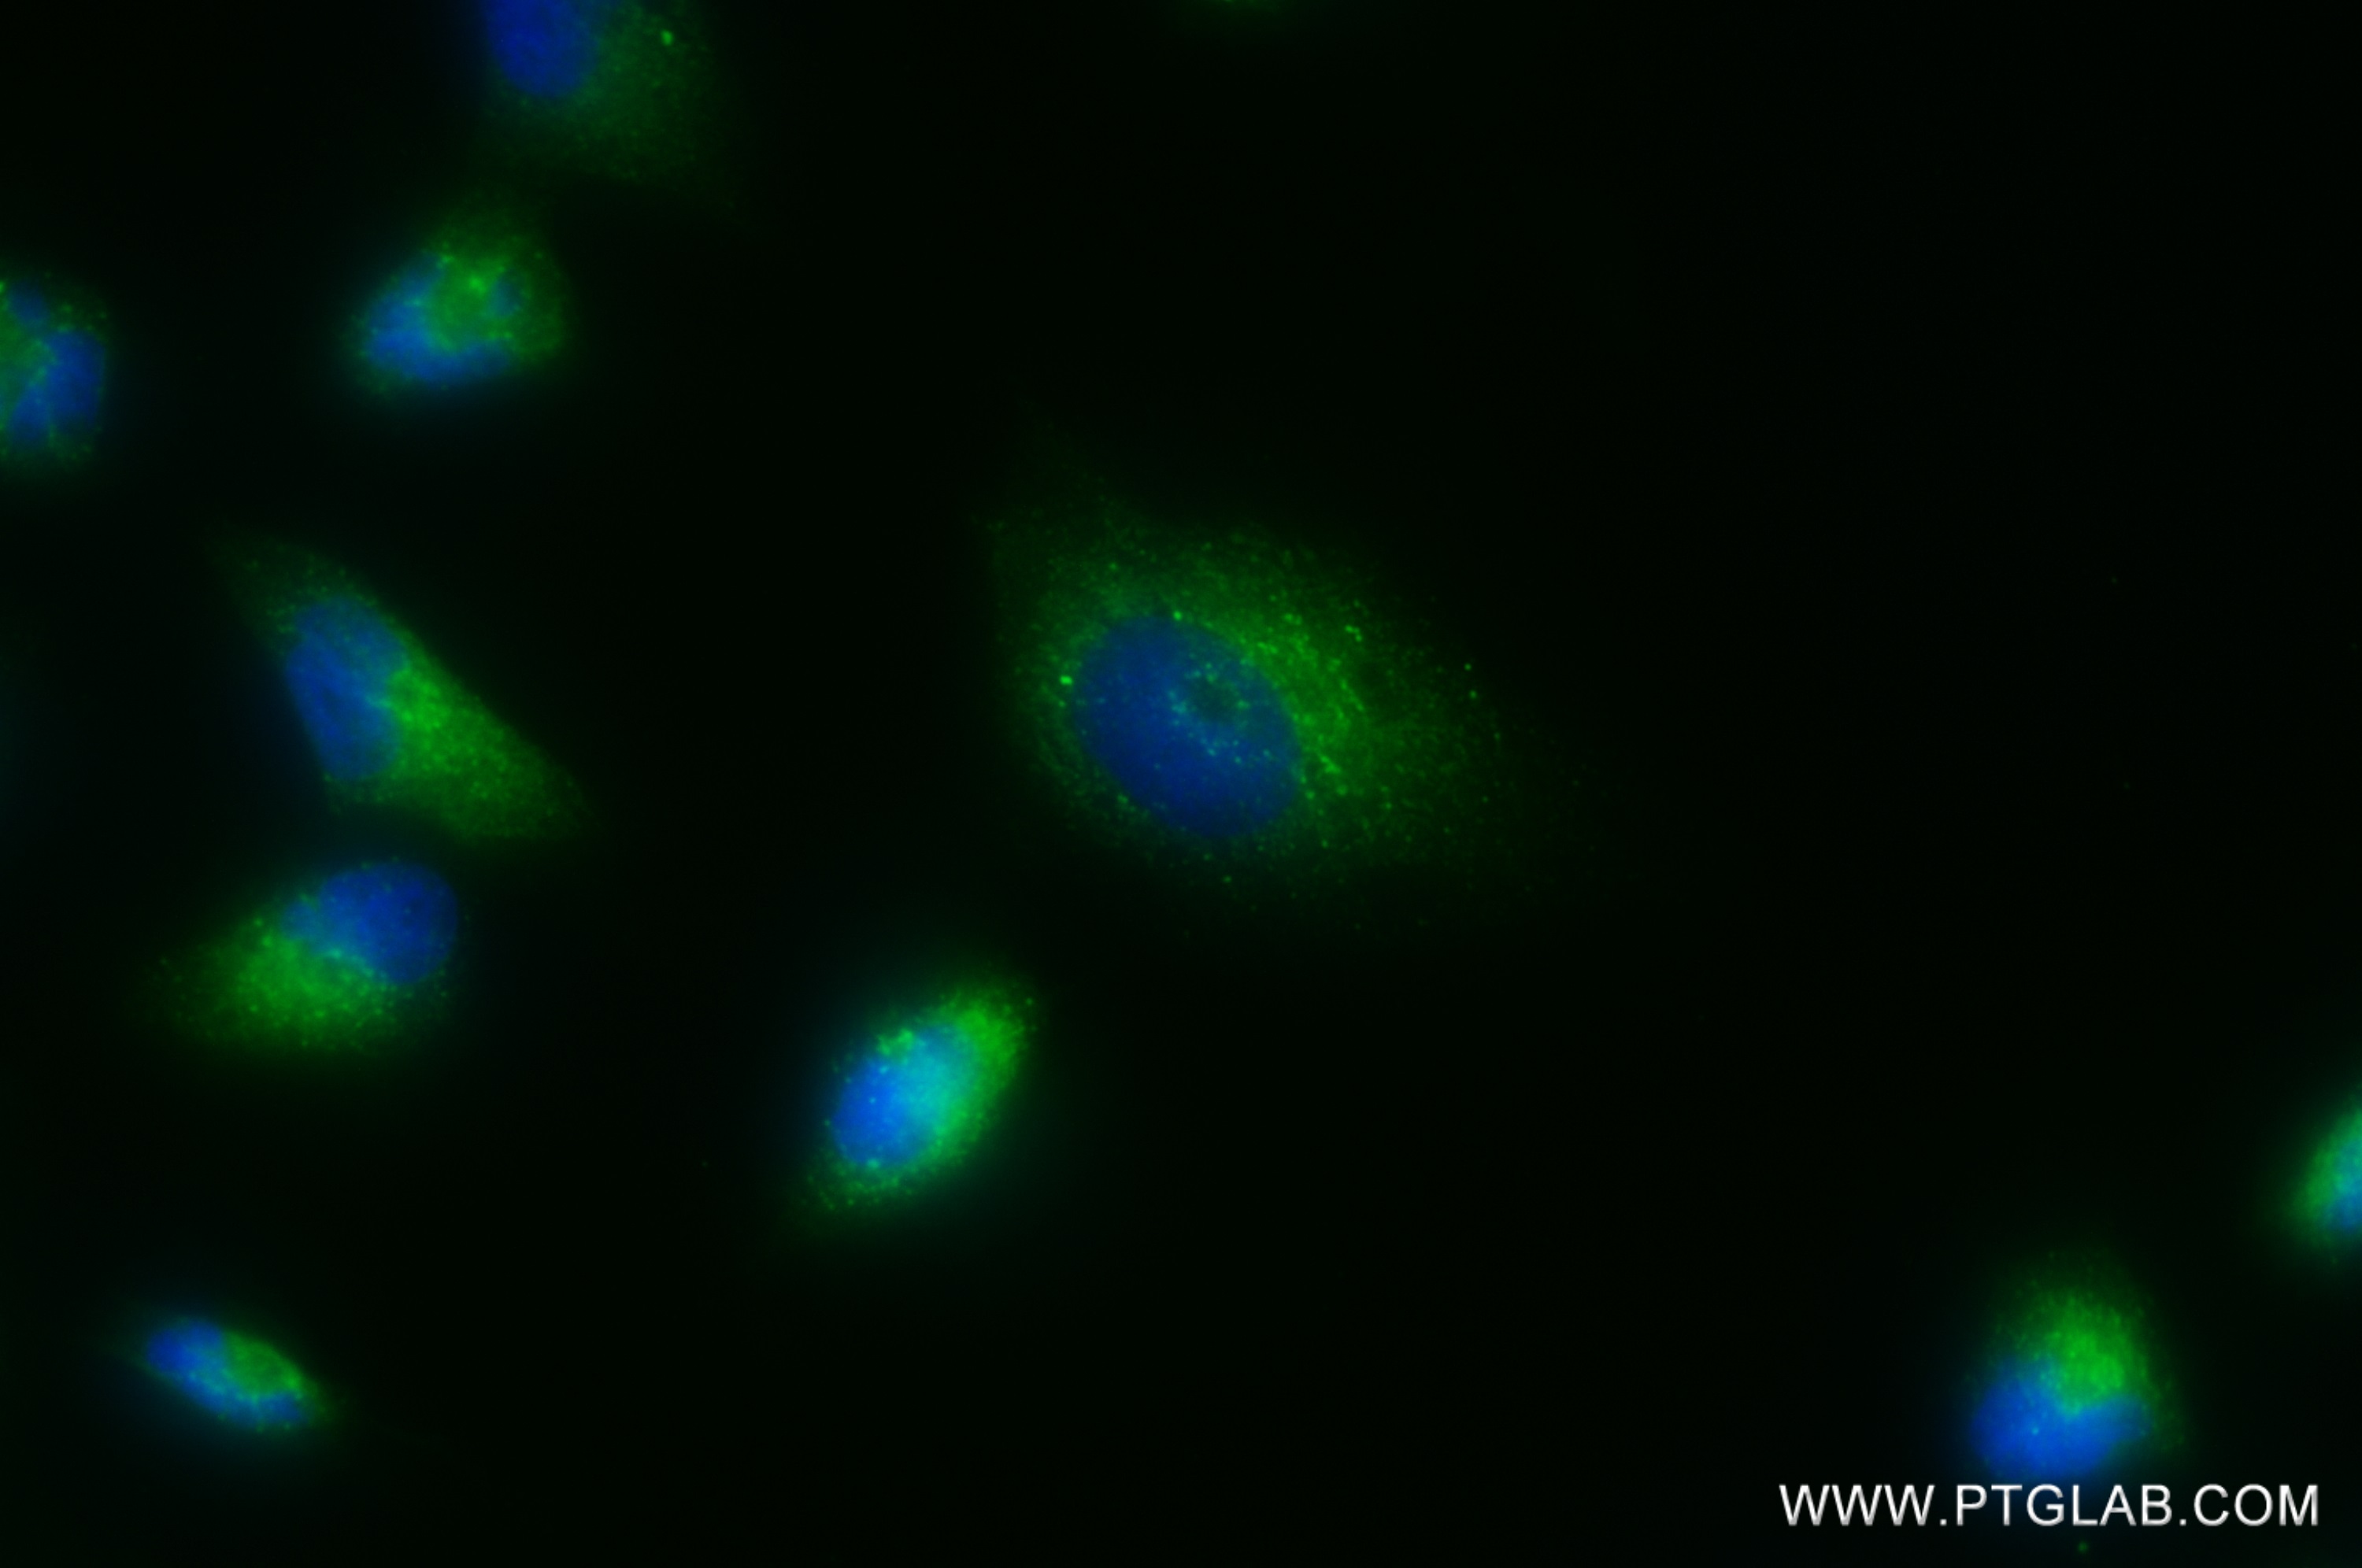 IF Staining of U-251 using 82935-1-RR (same clone as 82935-1-PBS)